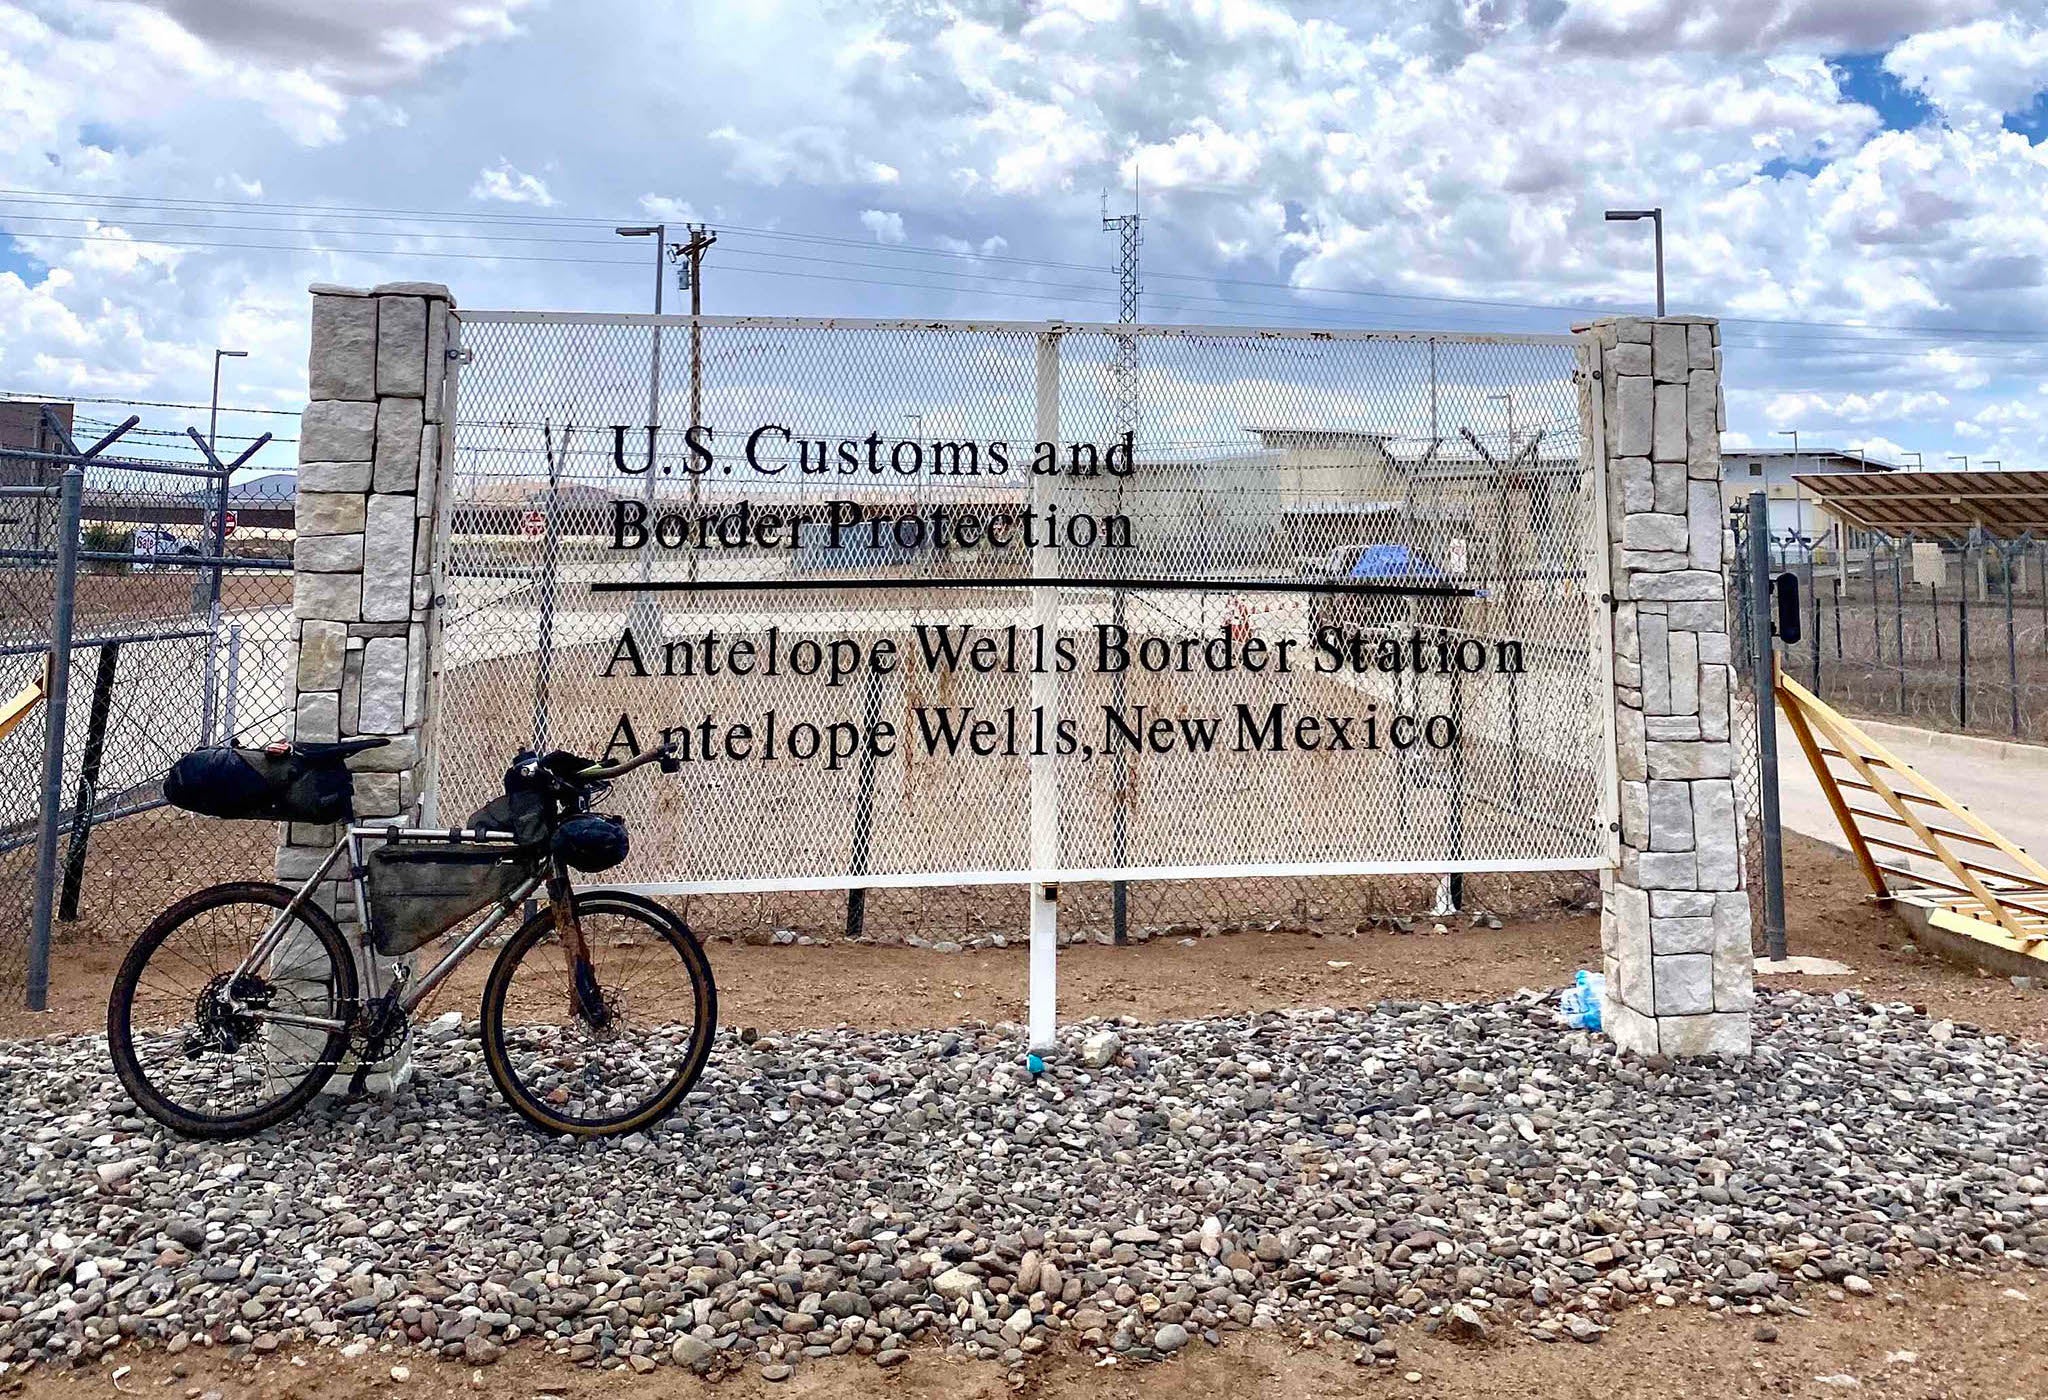 One of the world longest bikepacking races - The Tour Divide